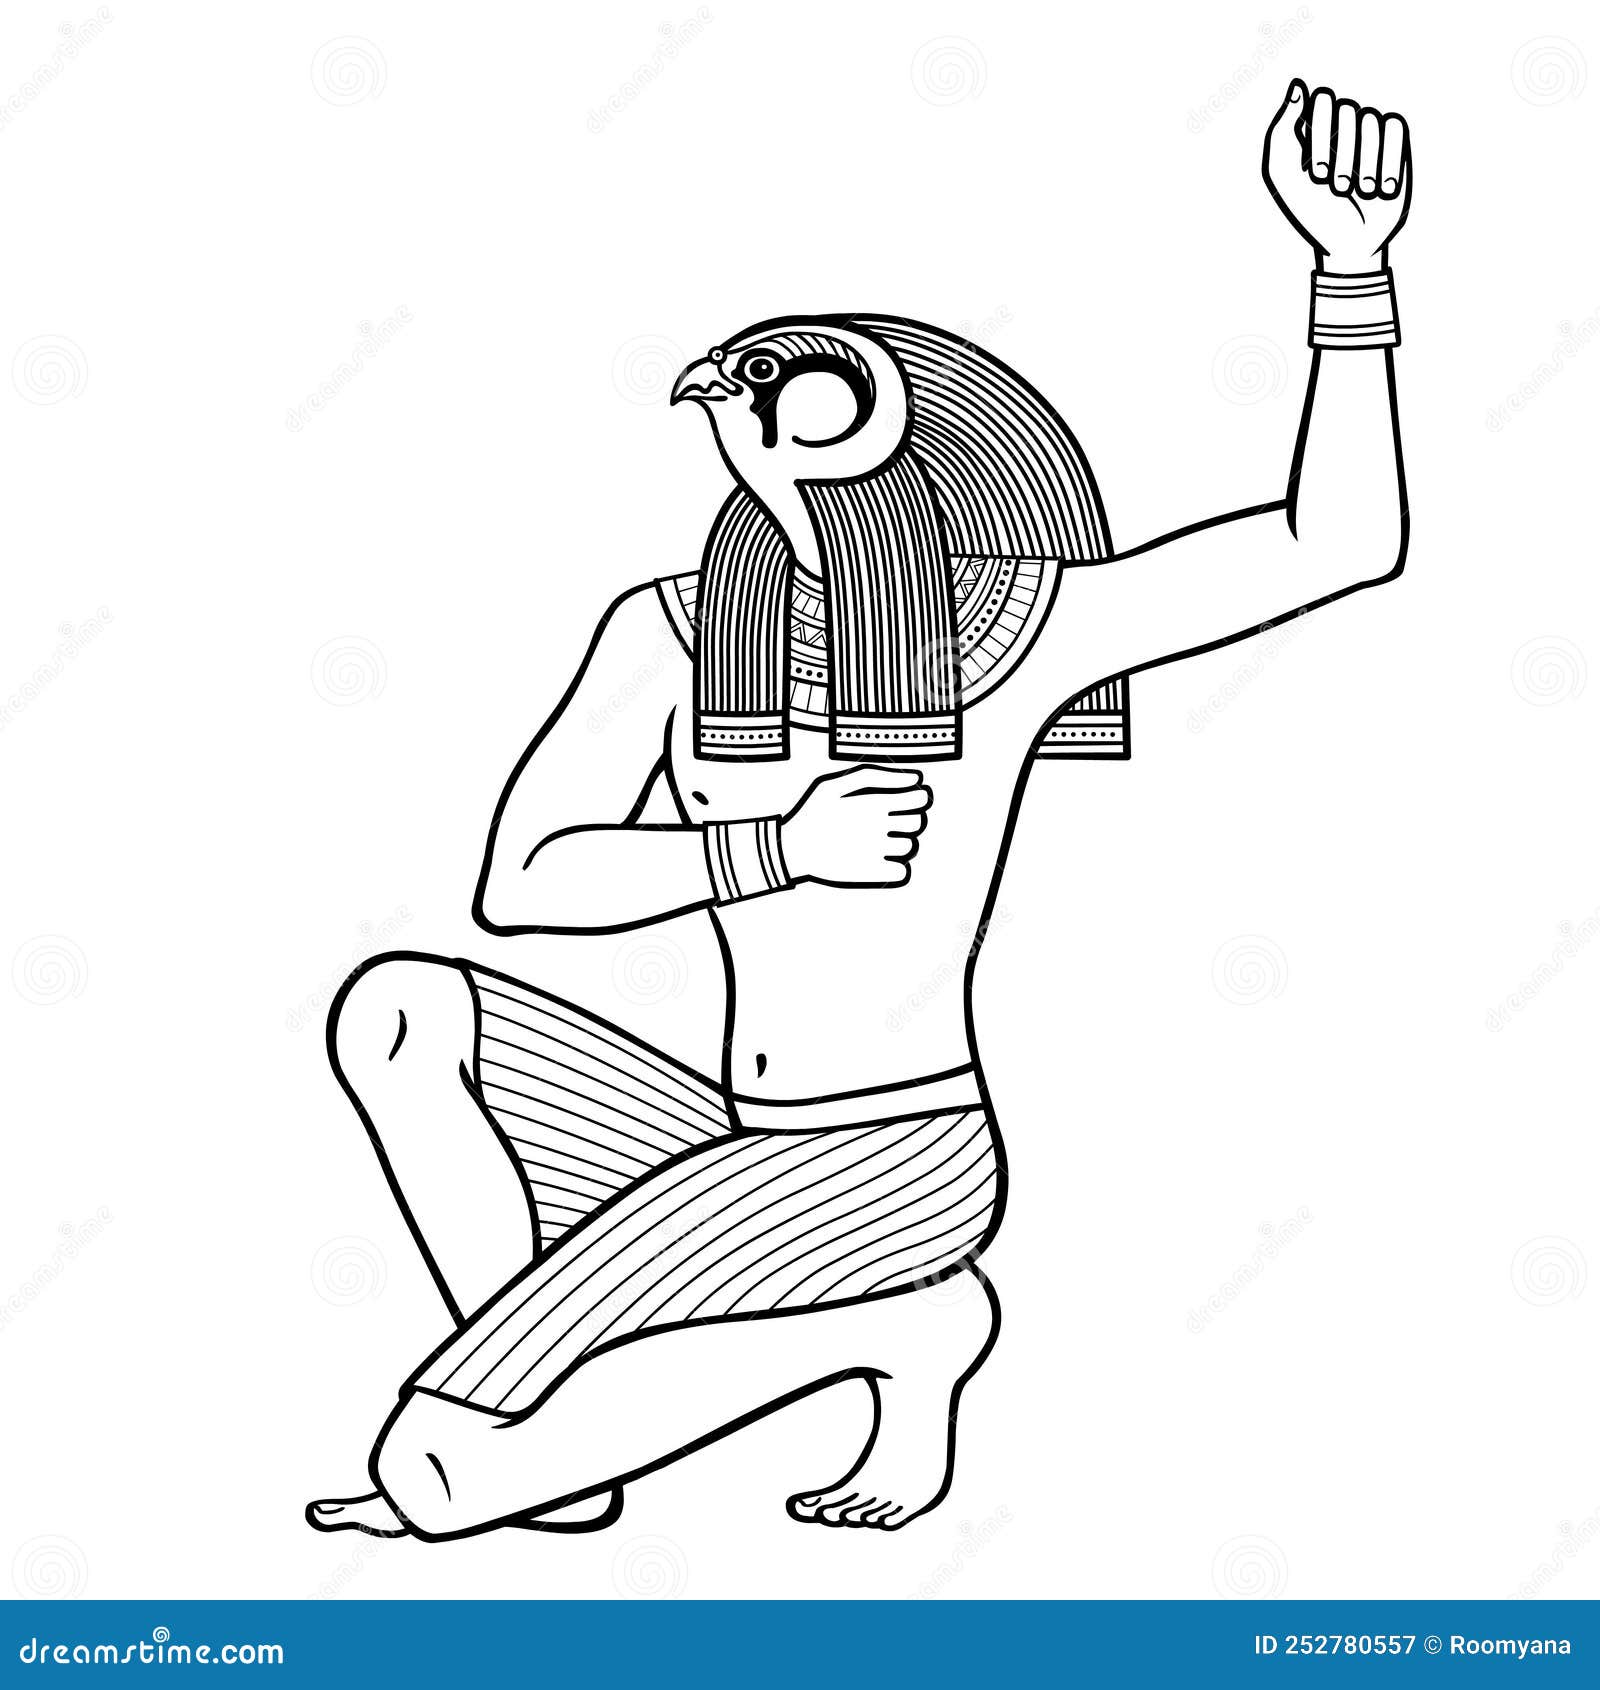 animation portrait: ancient egyptian god horus in  guise of falcon. view profile.